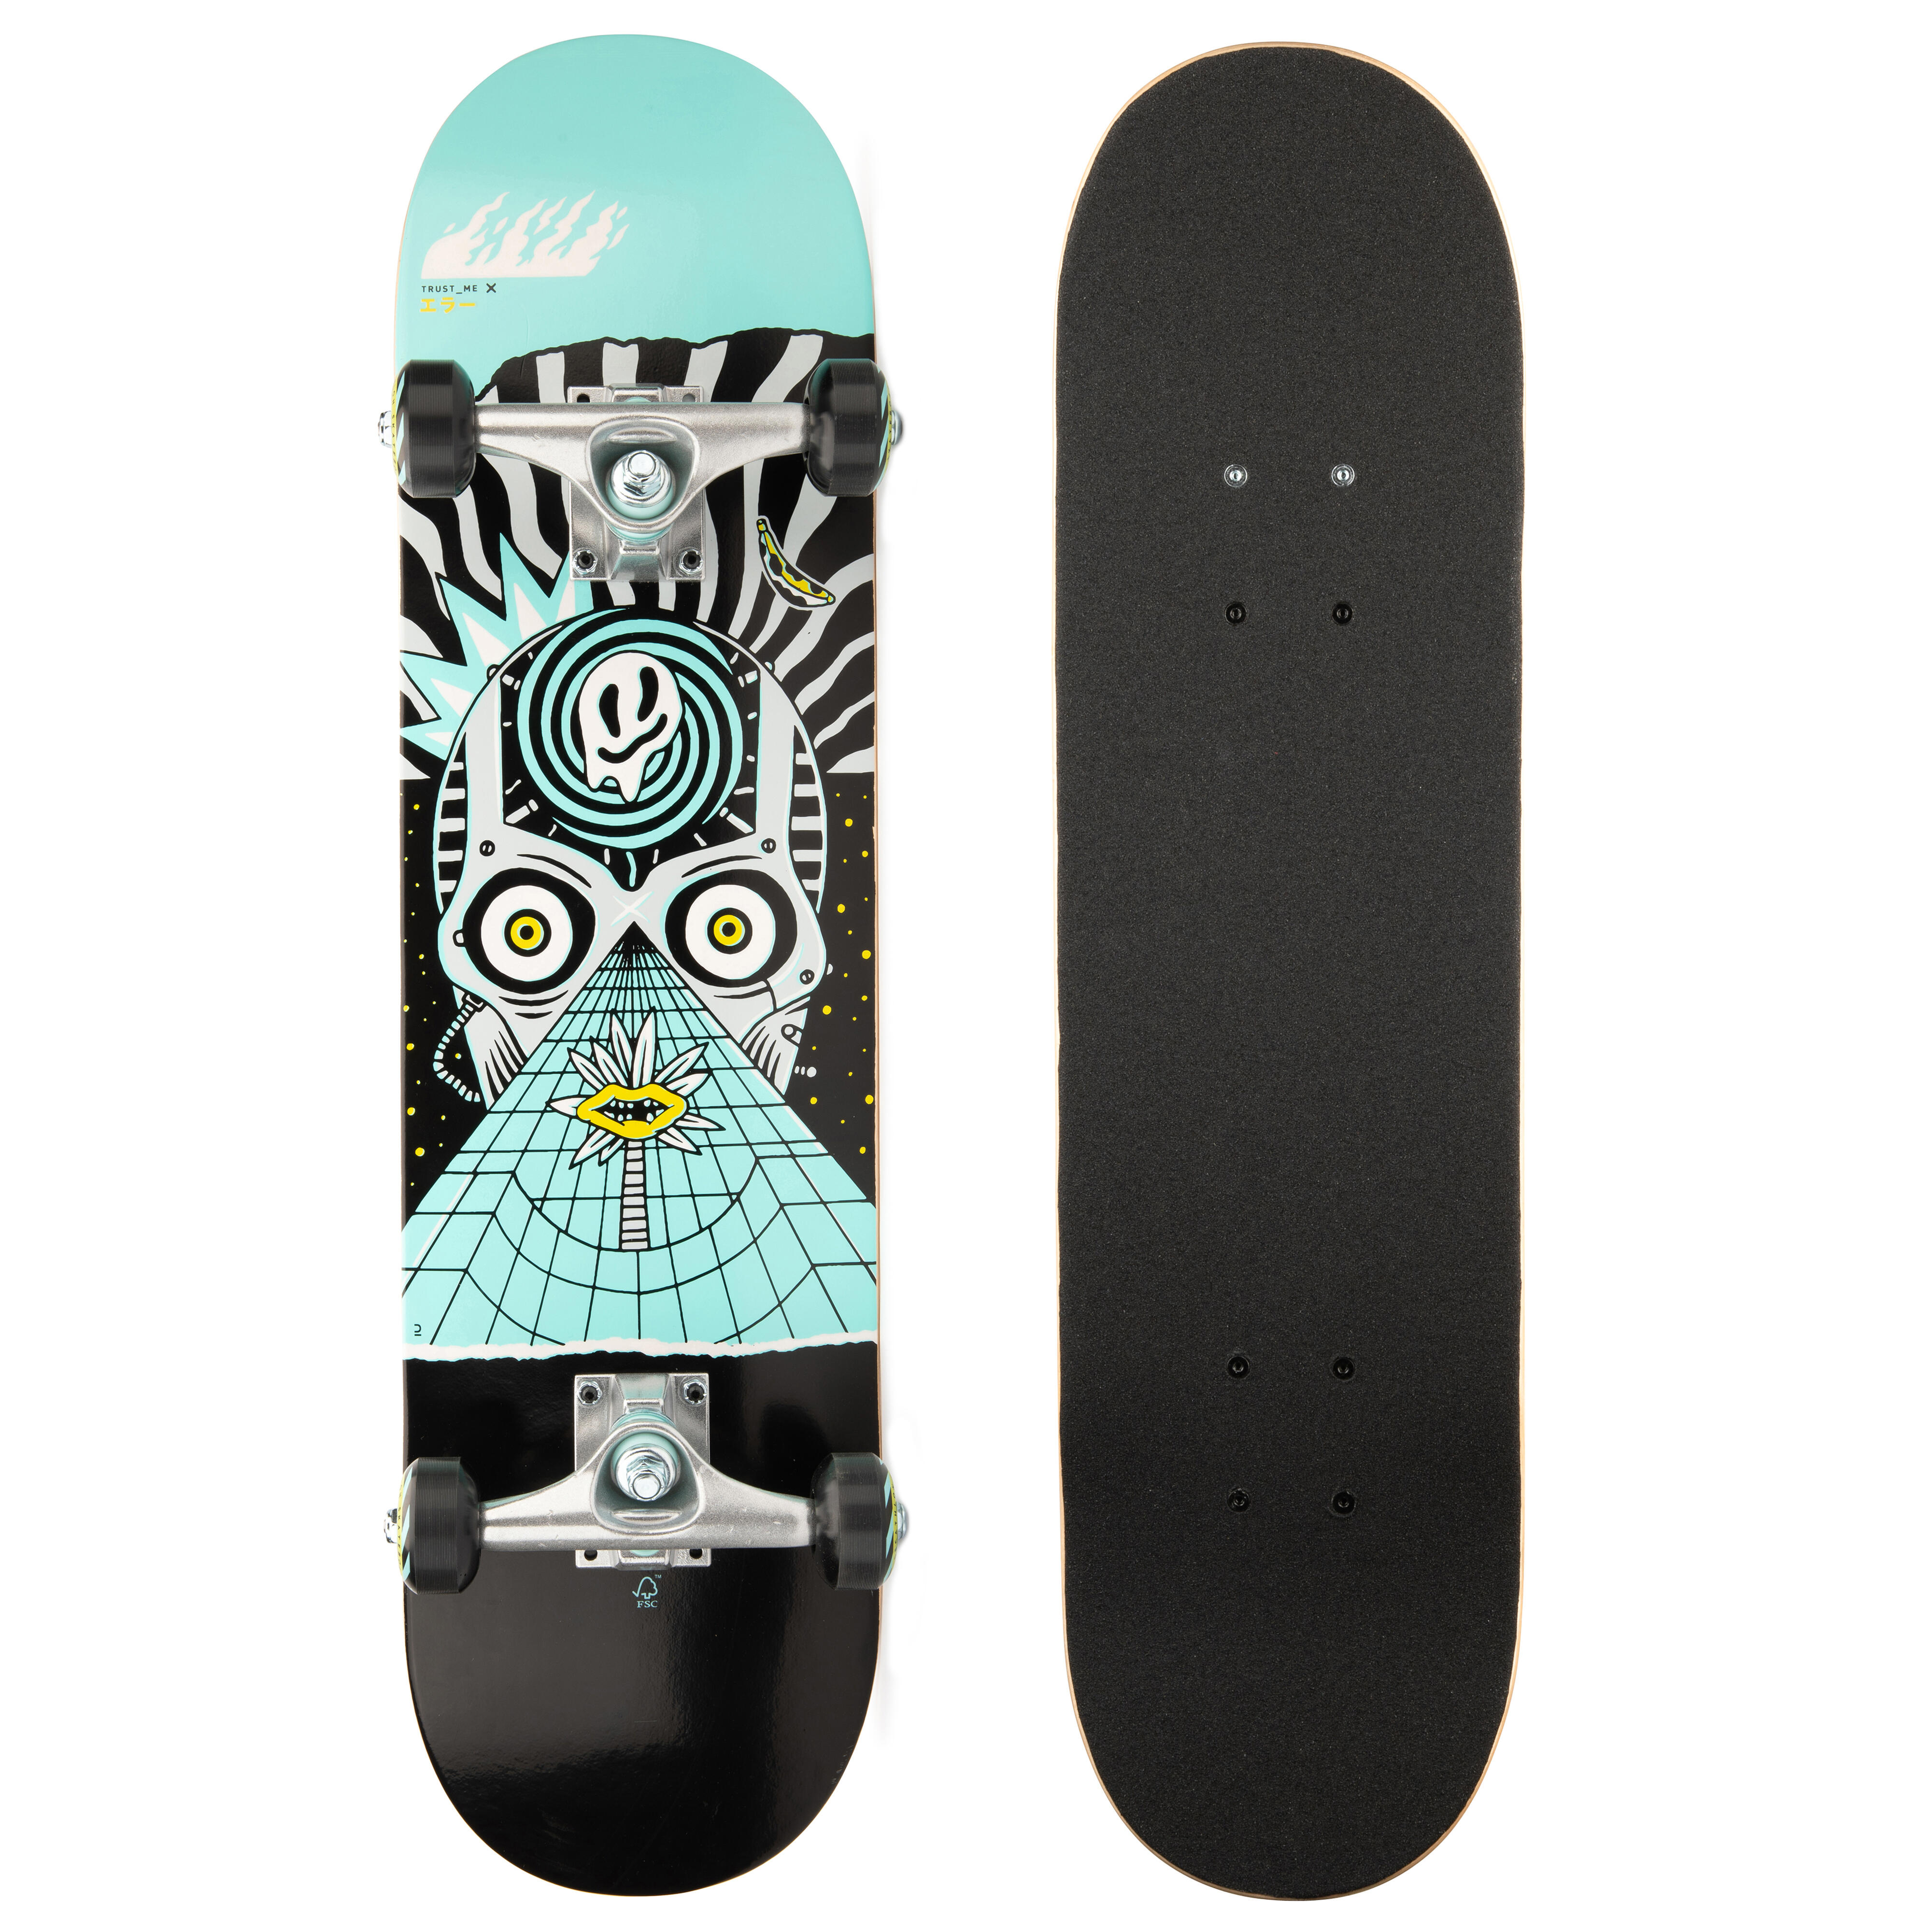 OXELO Skateboard Deck Kinder 8-12 Jahre CP100 Mid Cosmic 7,6